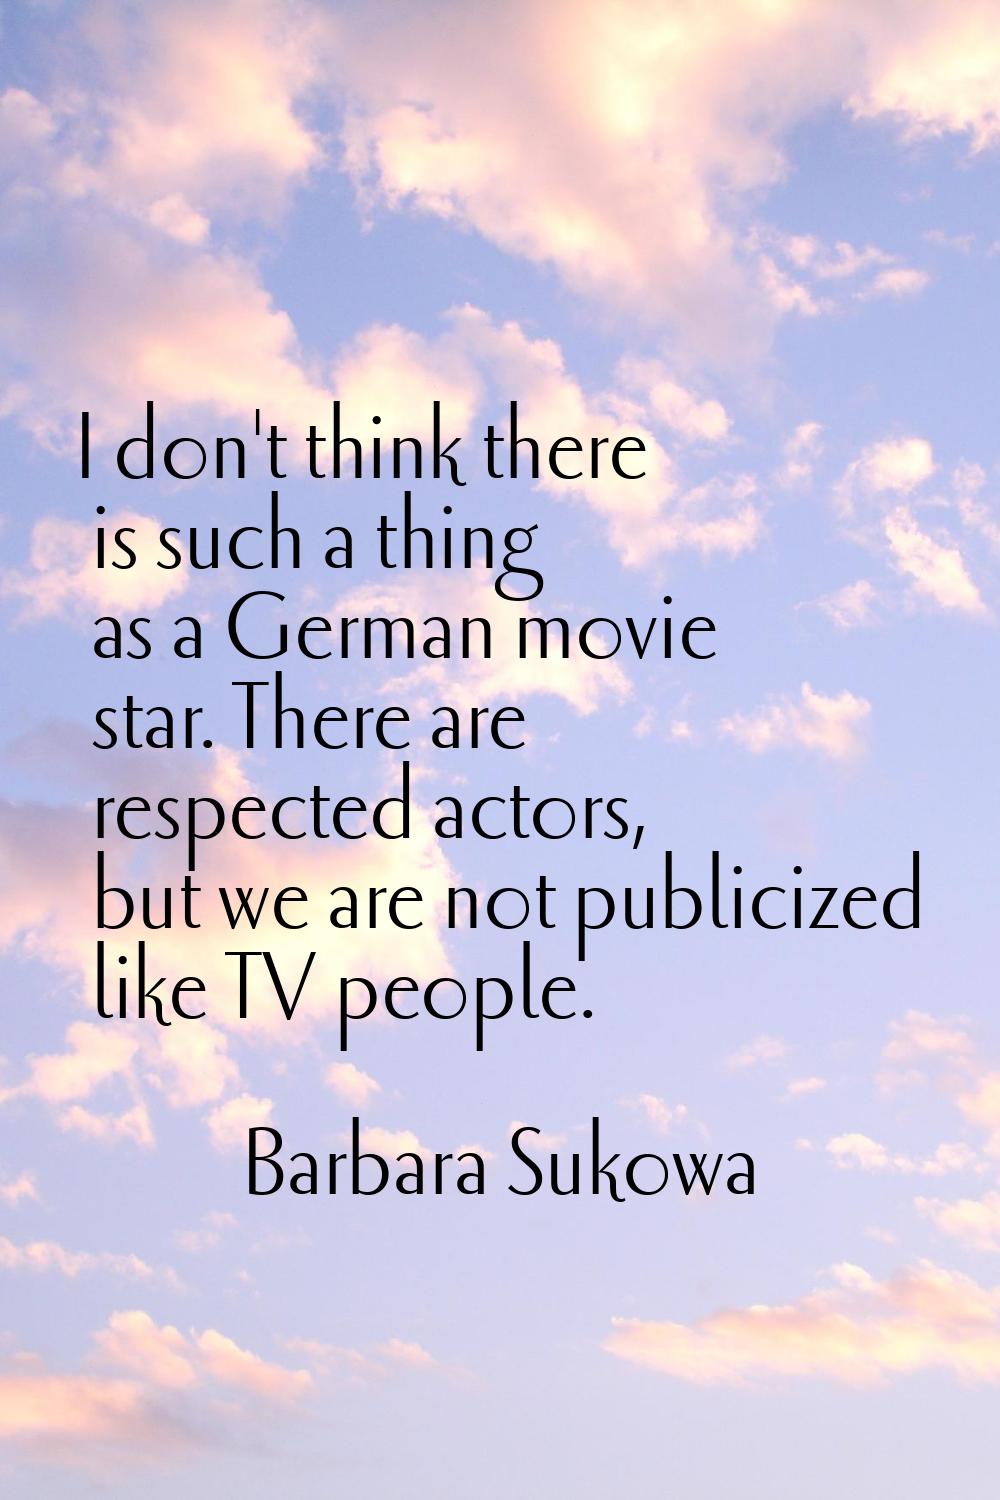 I don't think there is such a thing as a German movie star. There are respected actors, but we are 